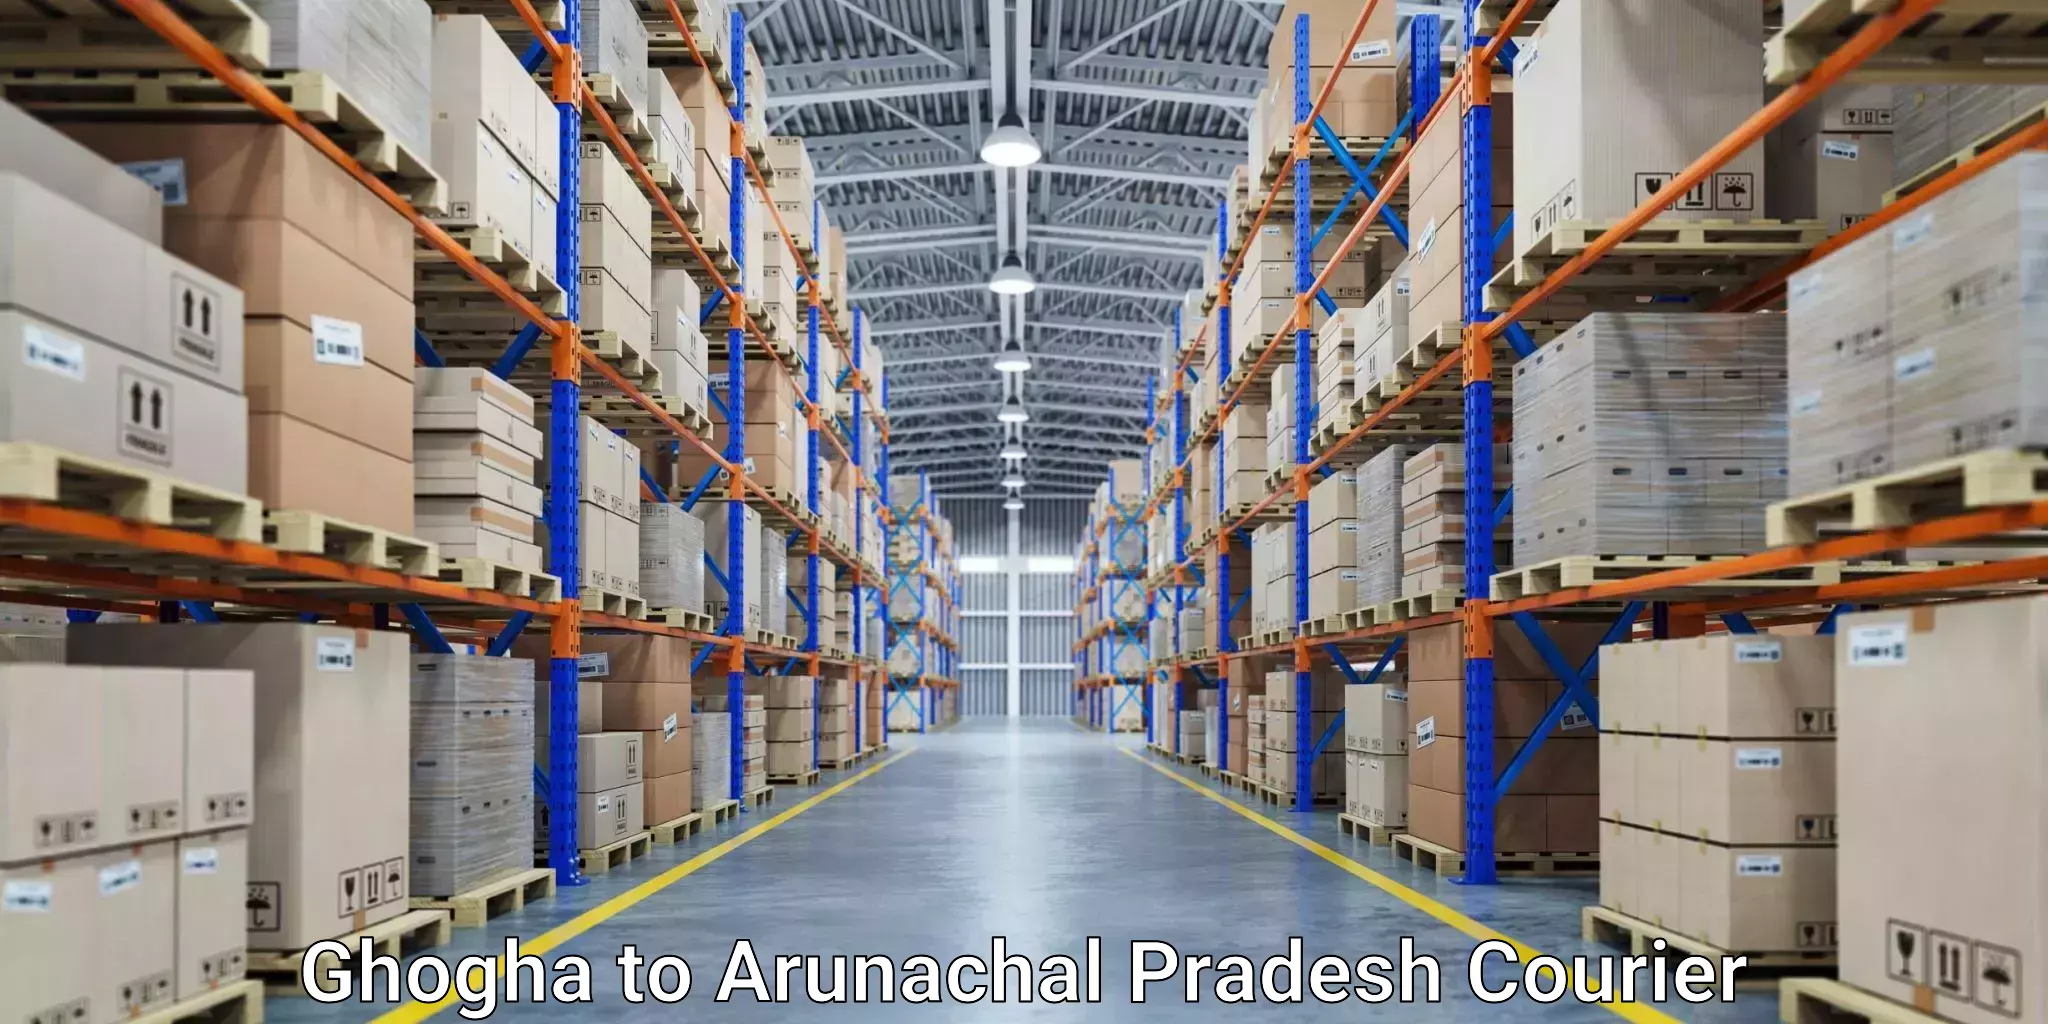 Express delivery capabilities in Ghogha to Arunachal Pradesh